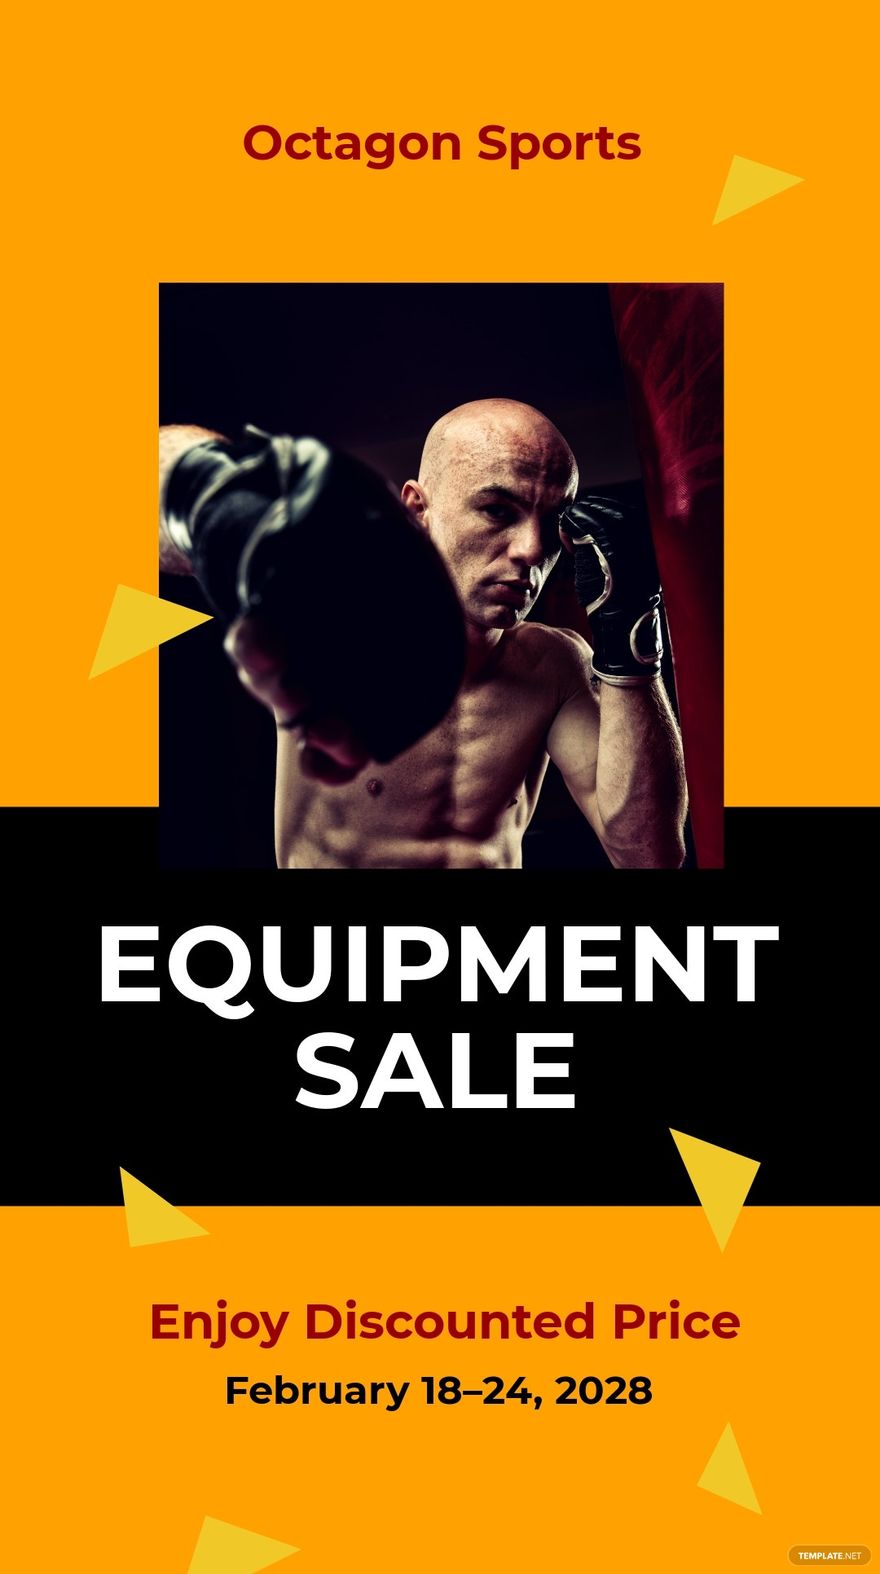 Free sports equipment samples and exclusive deals